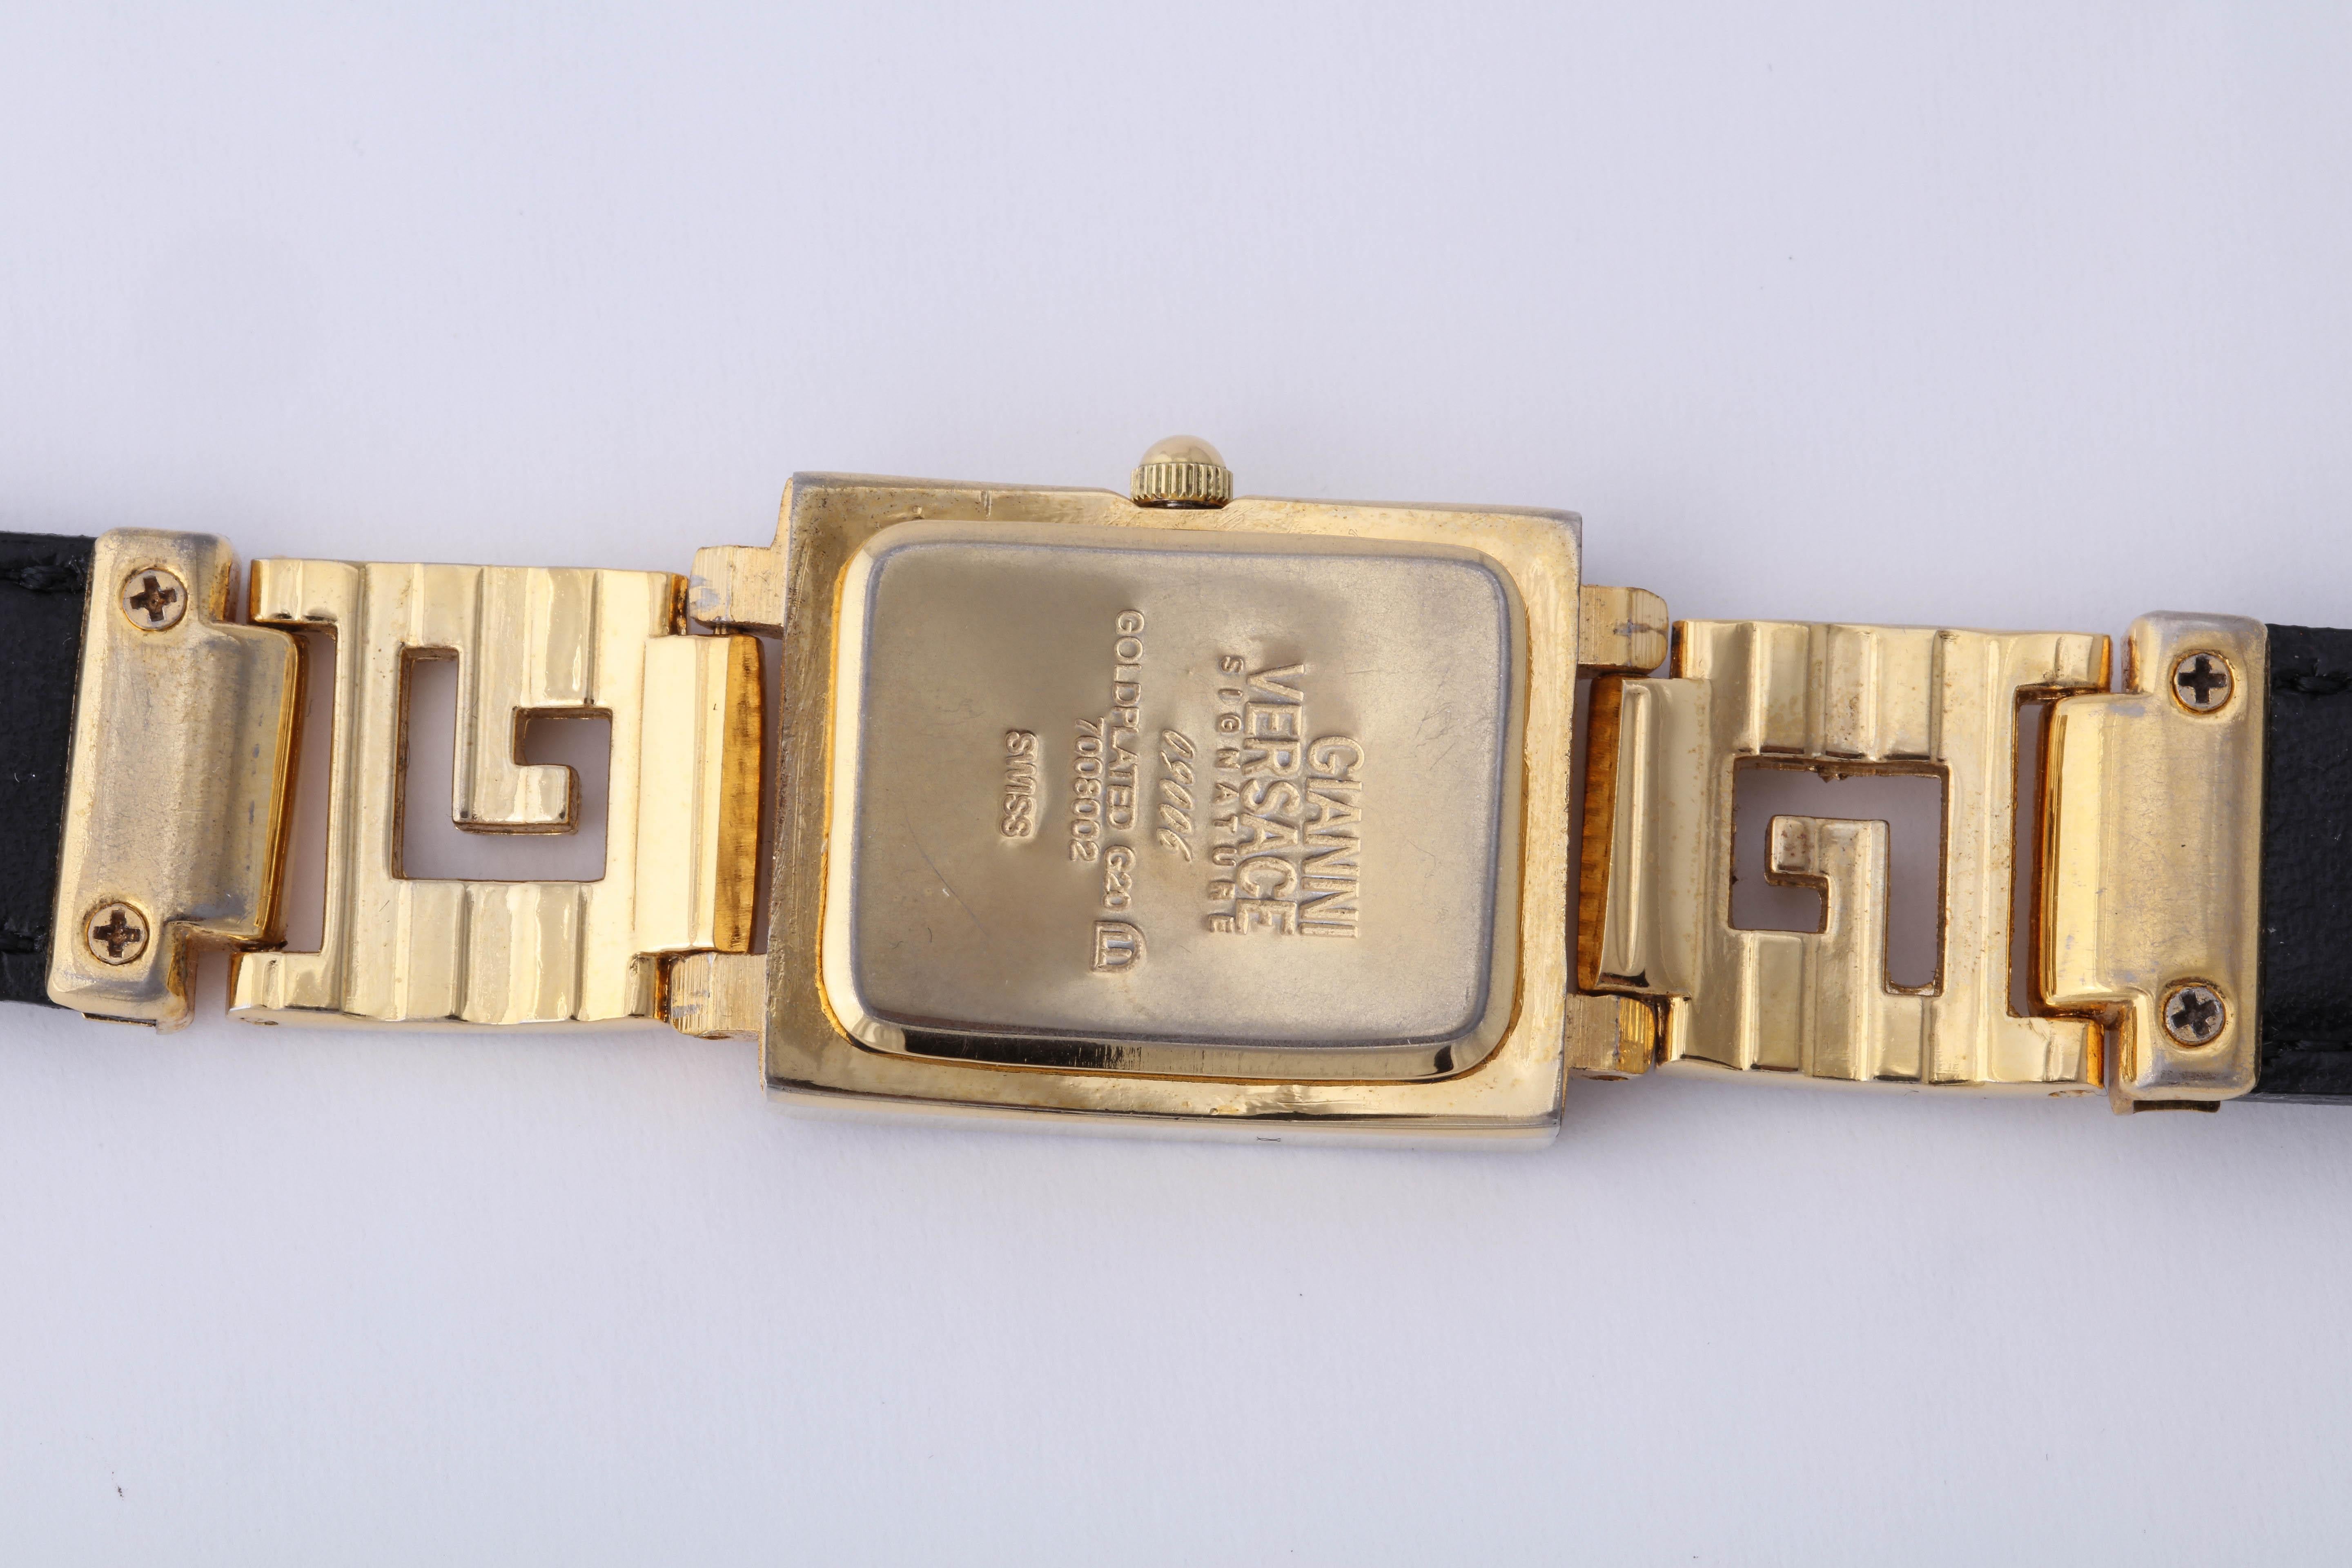   Gianni Versace Medusa Watch with Greek Key Motifs  In Good Condition For Sale In Chicago, IL